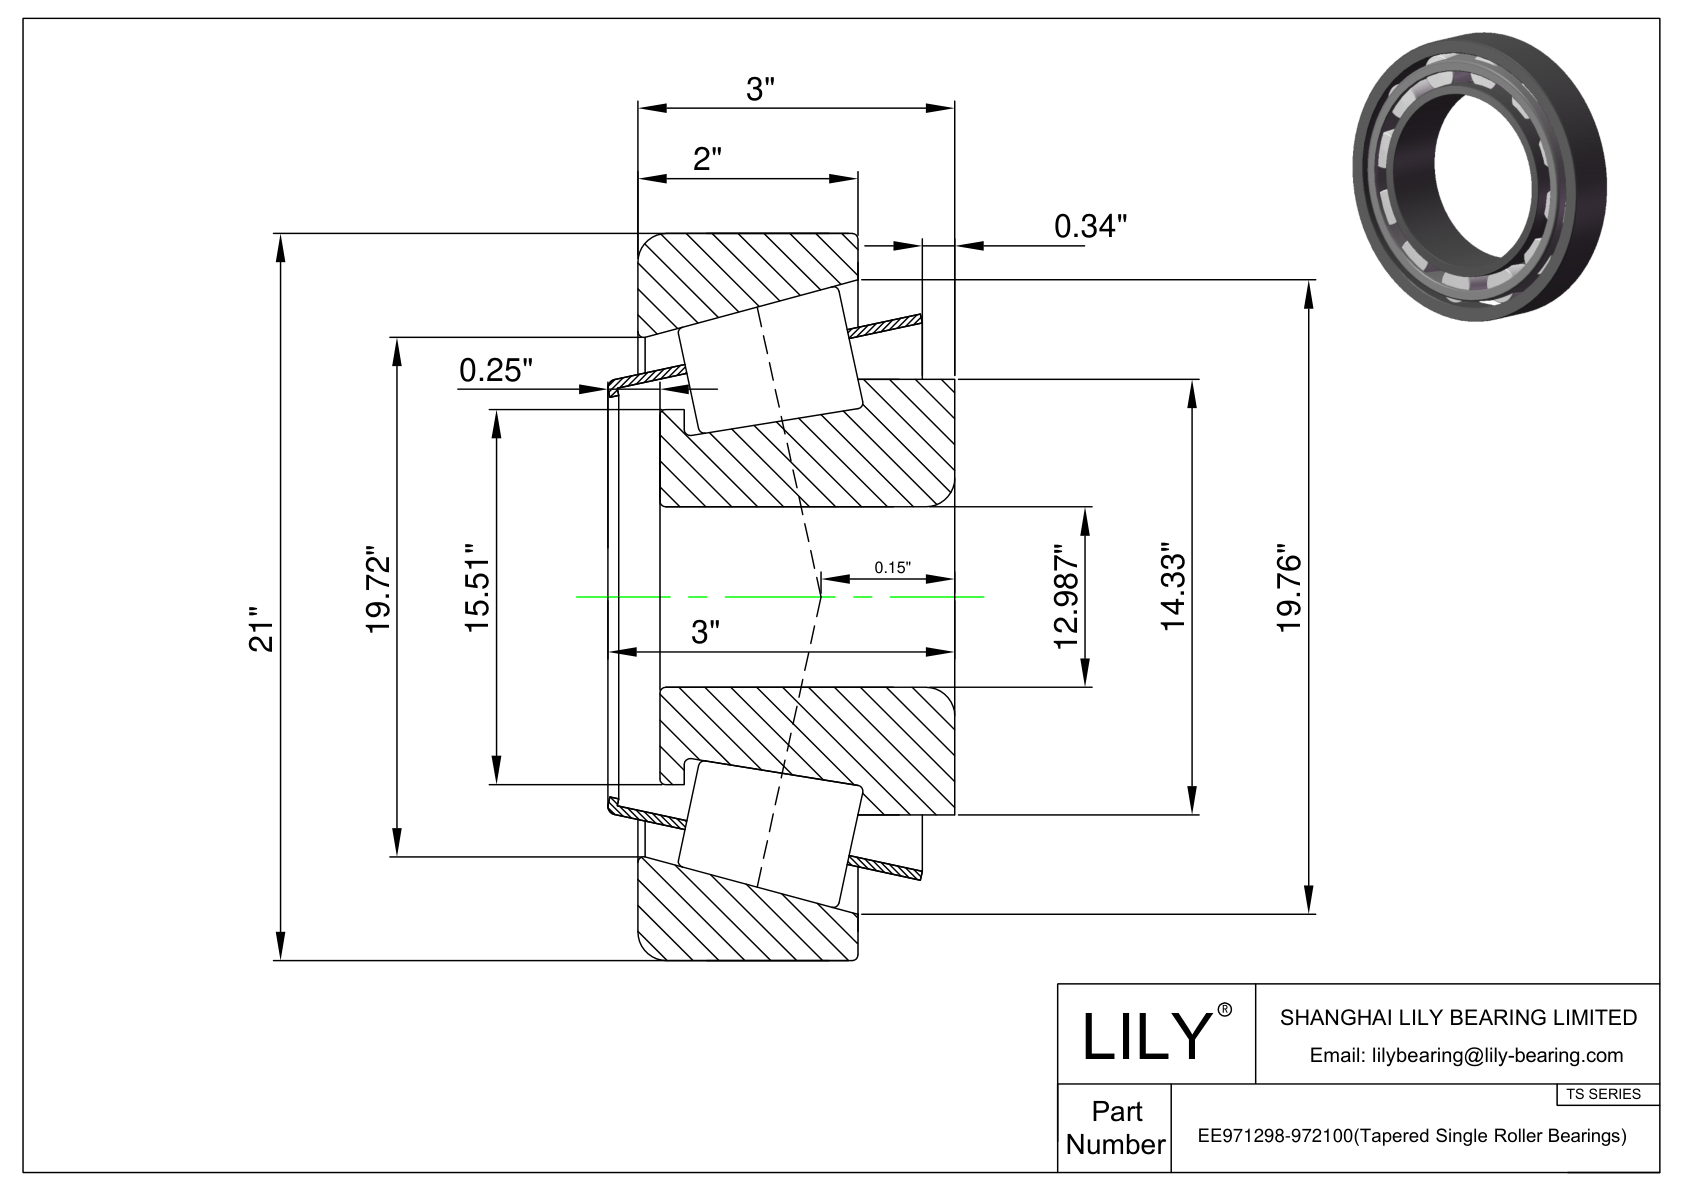 EE971298-972100 TS (Tapered Single Roller Bearings) (Imperial) cad drawing